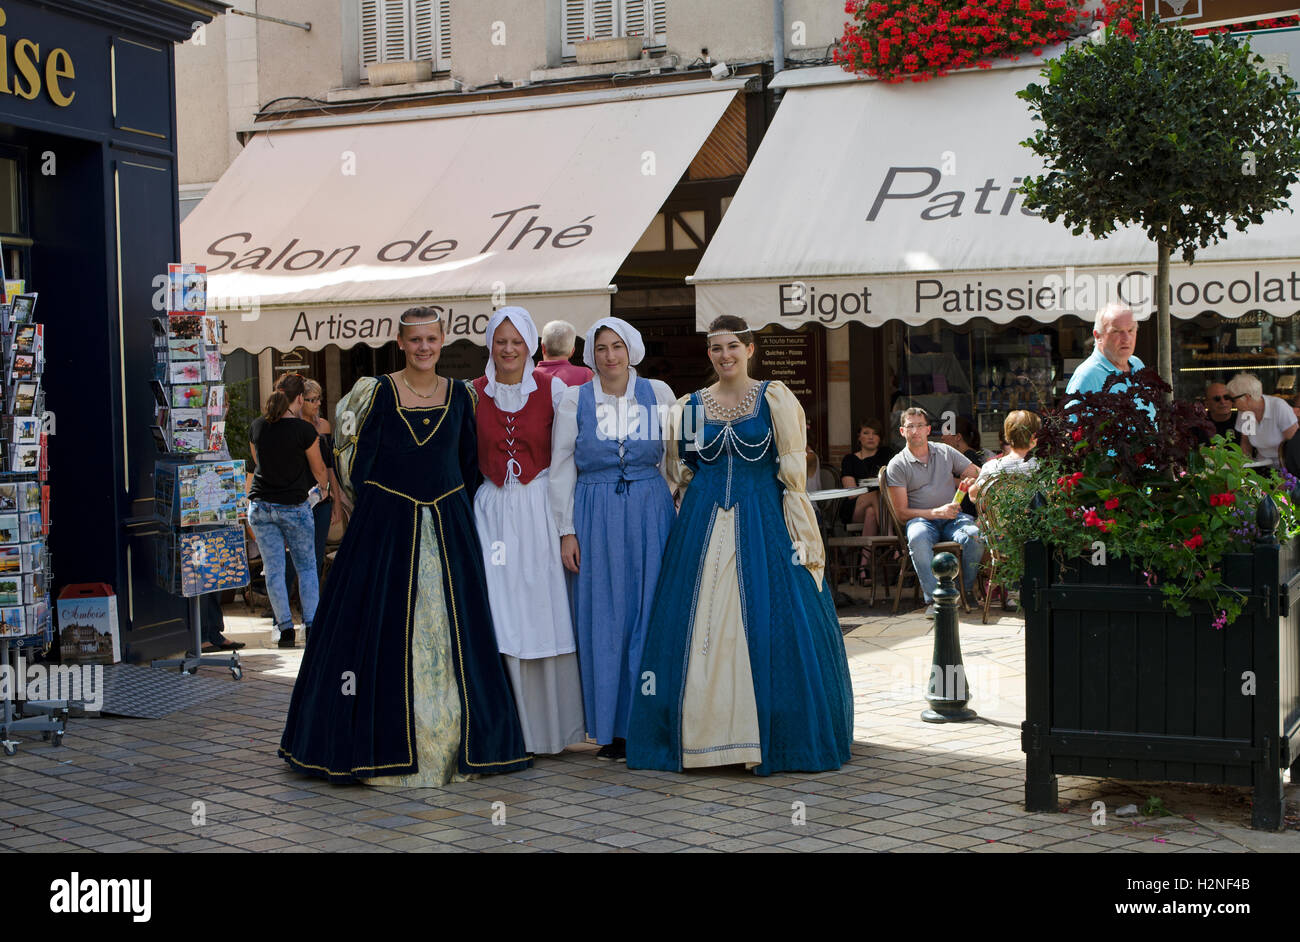 Amboise France - Four women in period costume walking in the old town center of Amboise situated along the Loire valley Stock Photo